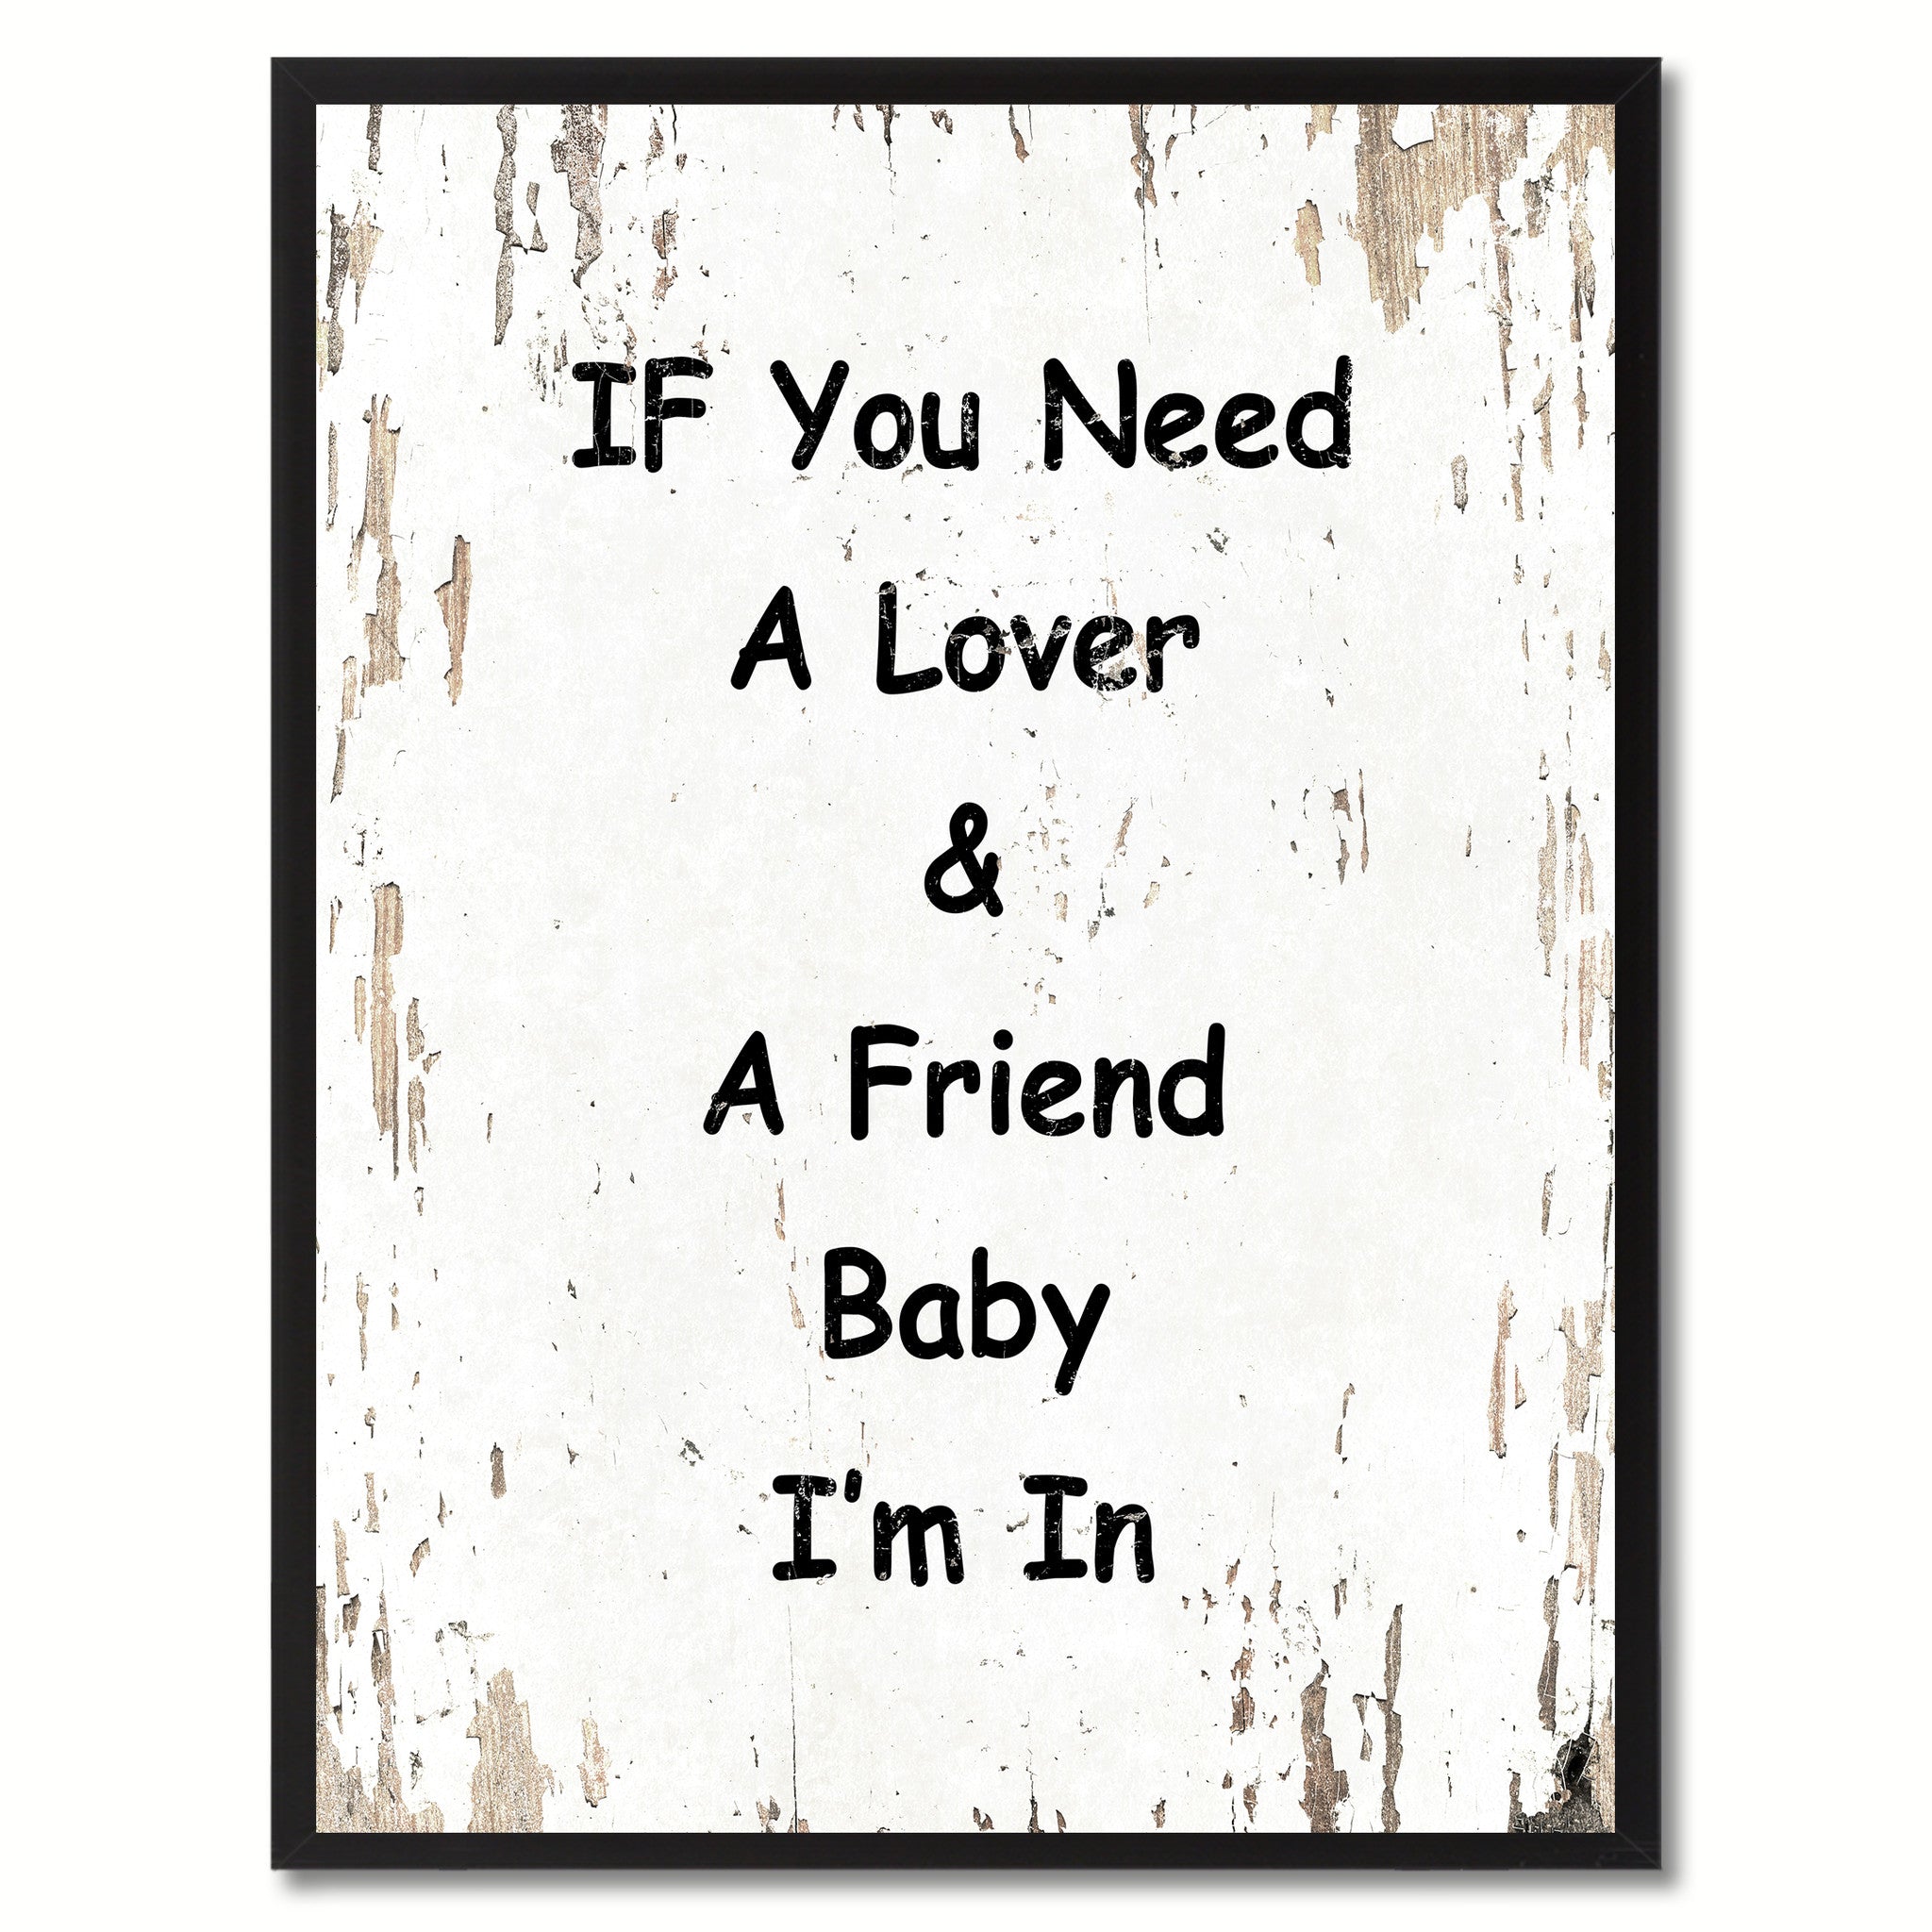 If you need a lover & a friend baby I'm in Happy Quote Saying Gift Ideas Home Decor Wall Art